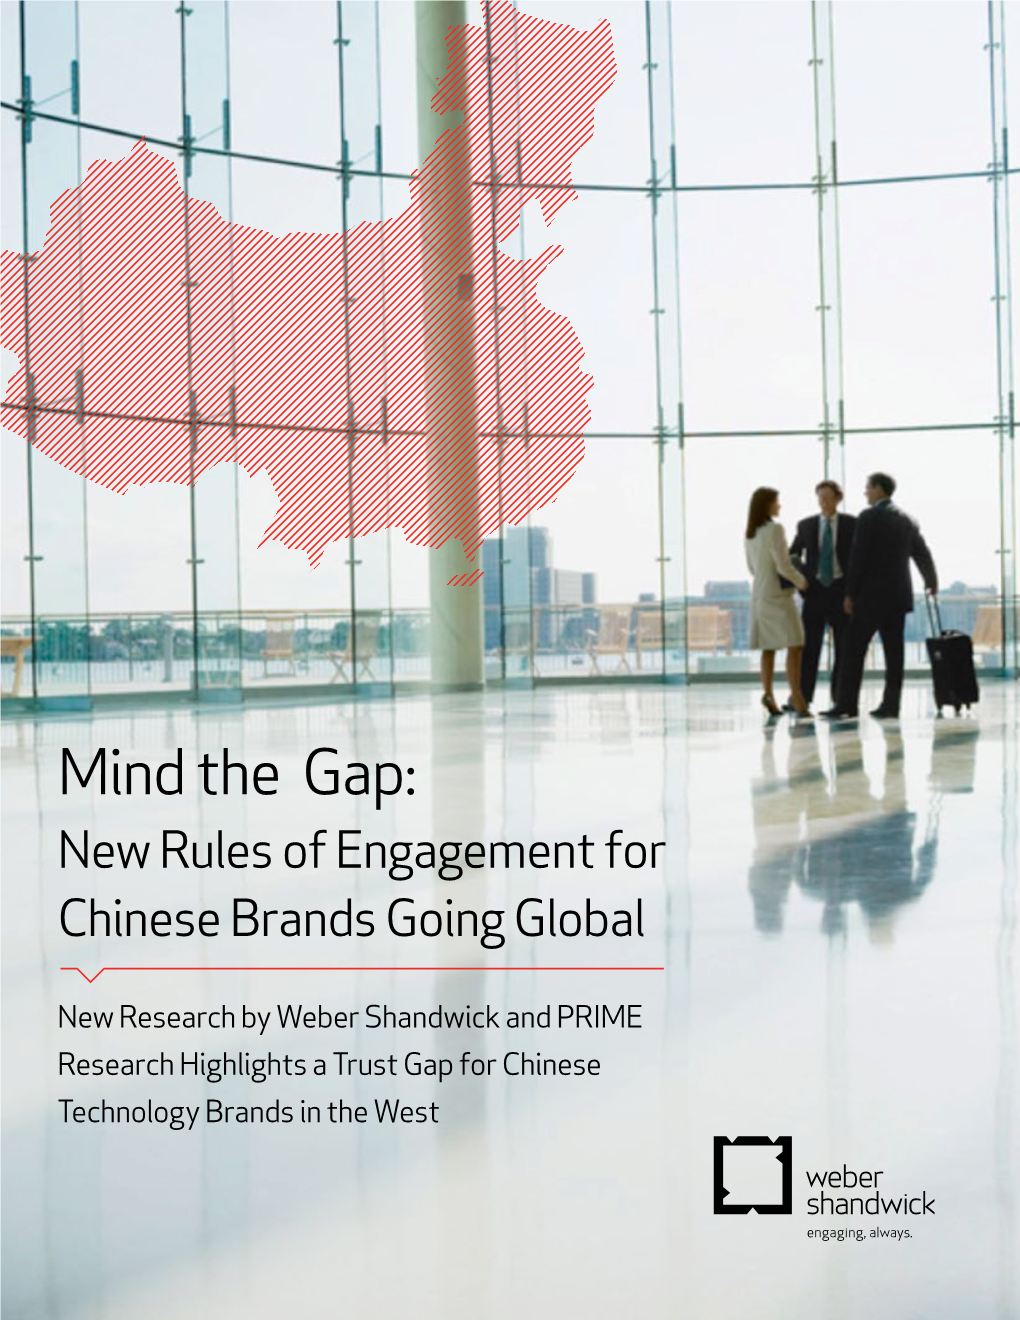 Mind the Gap: New Rules of Engagement for Chinese Brands Going Global